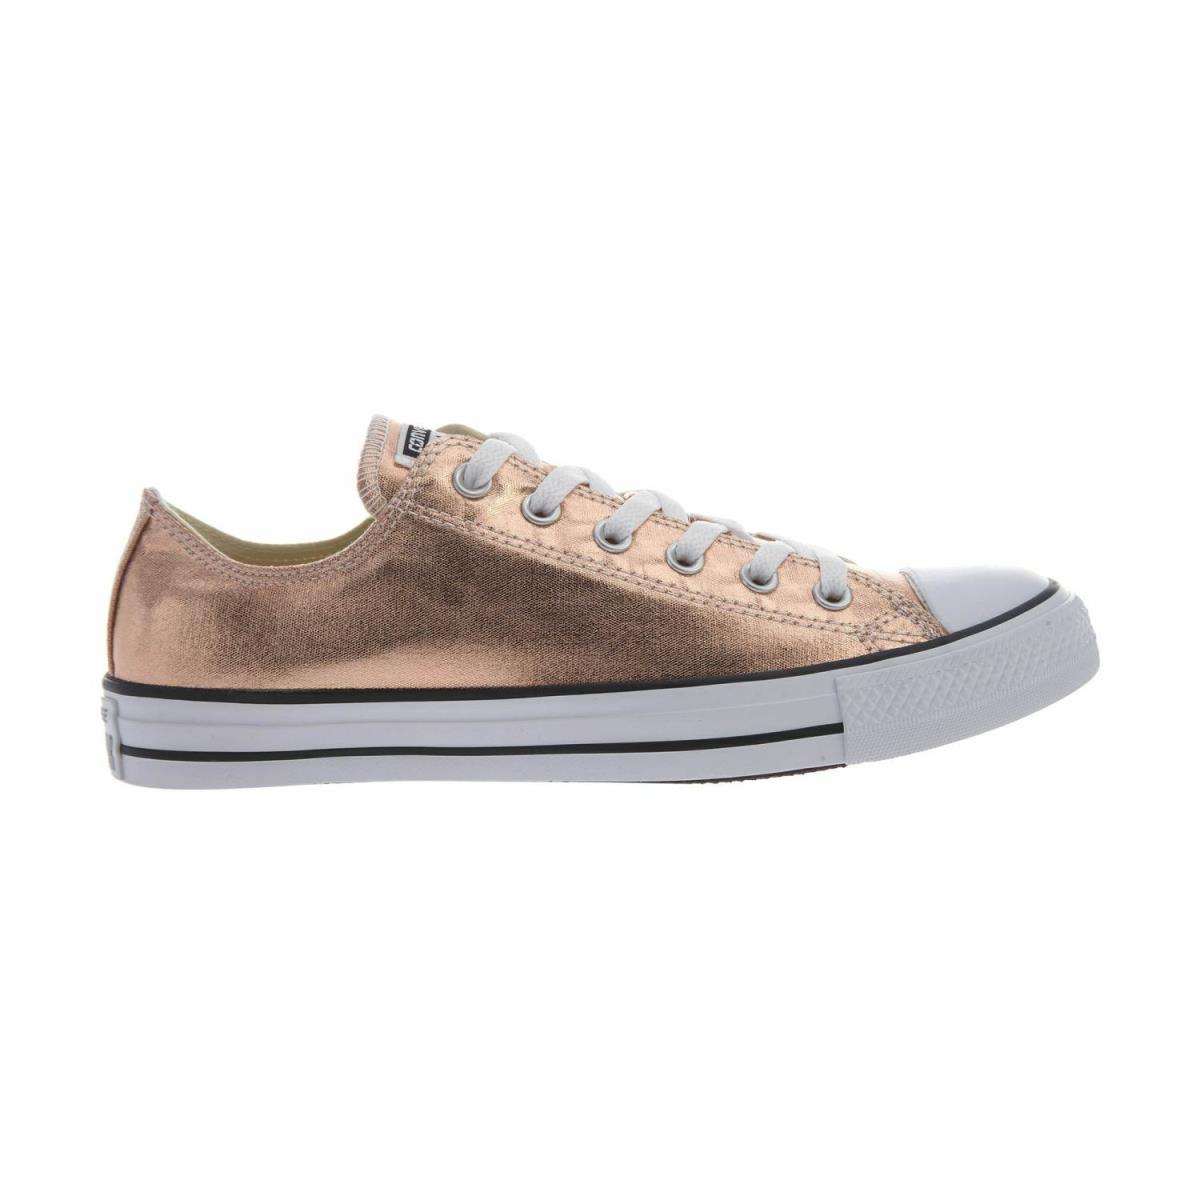 Converse CT All Star Ox Womens 154037F Metallic Sunset Glow Shoes Size 12